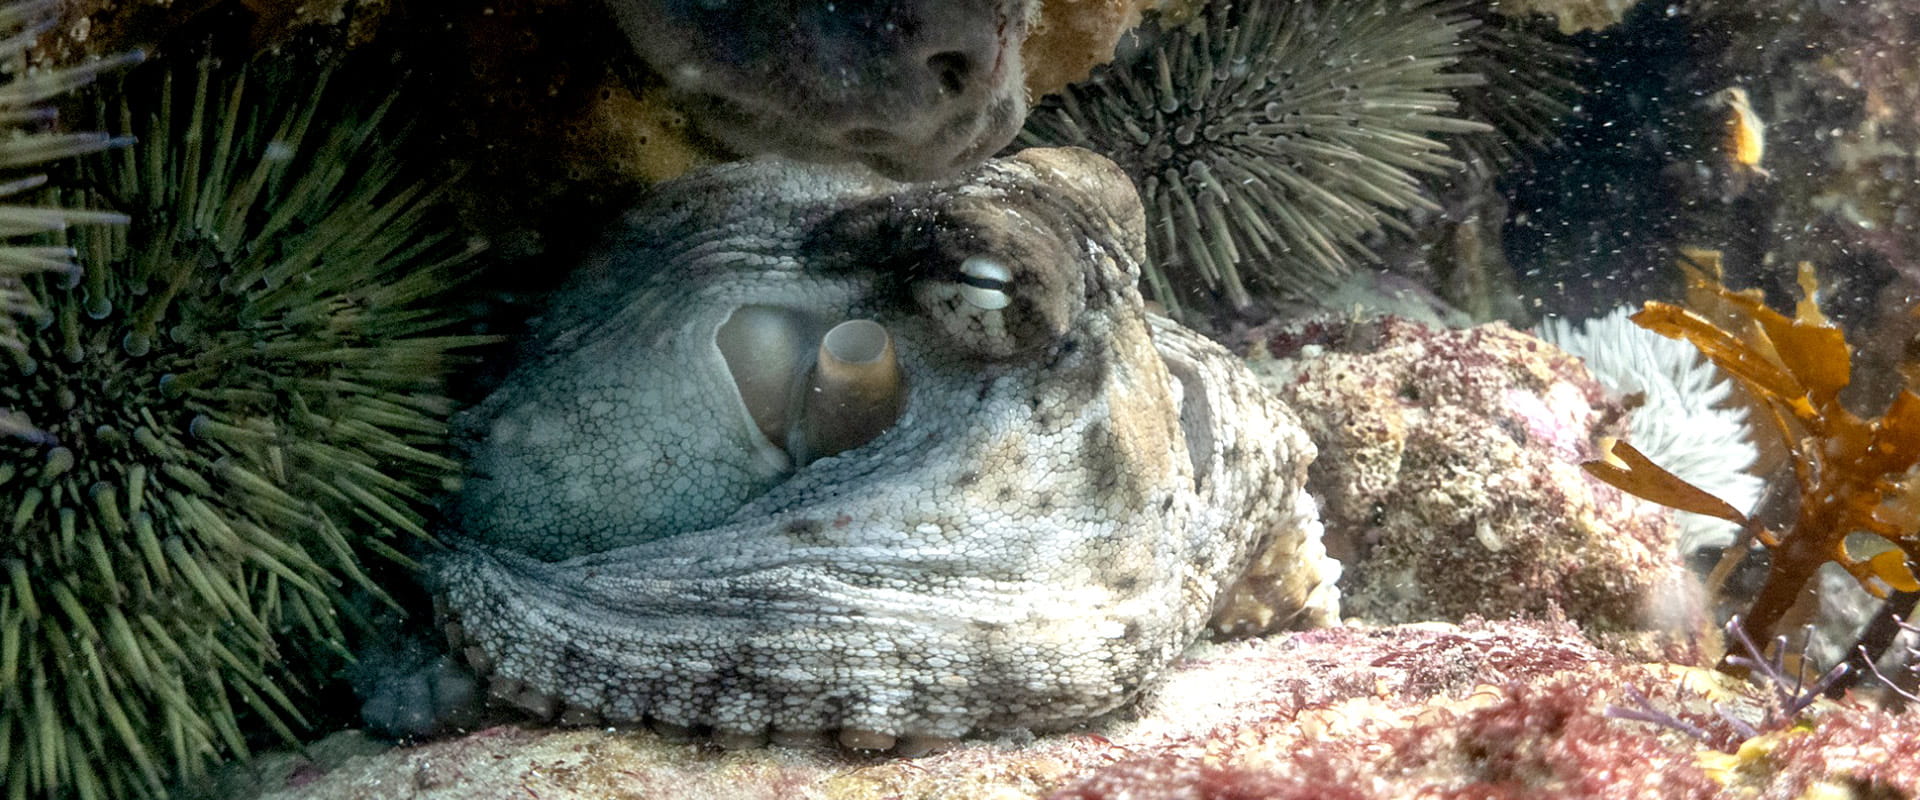 An octopus hides on the sea bed, curled amongst the rocks, surrounded coral and urchins.